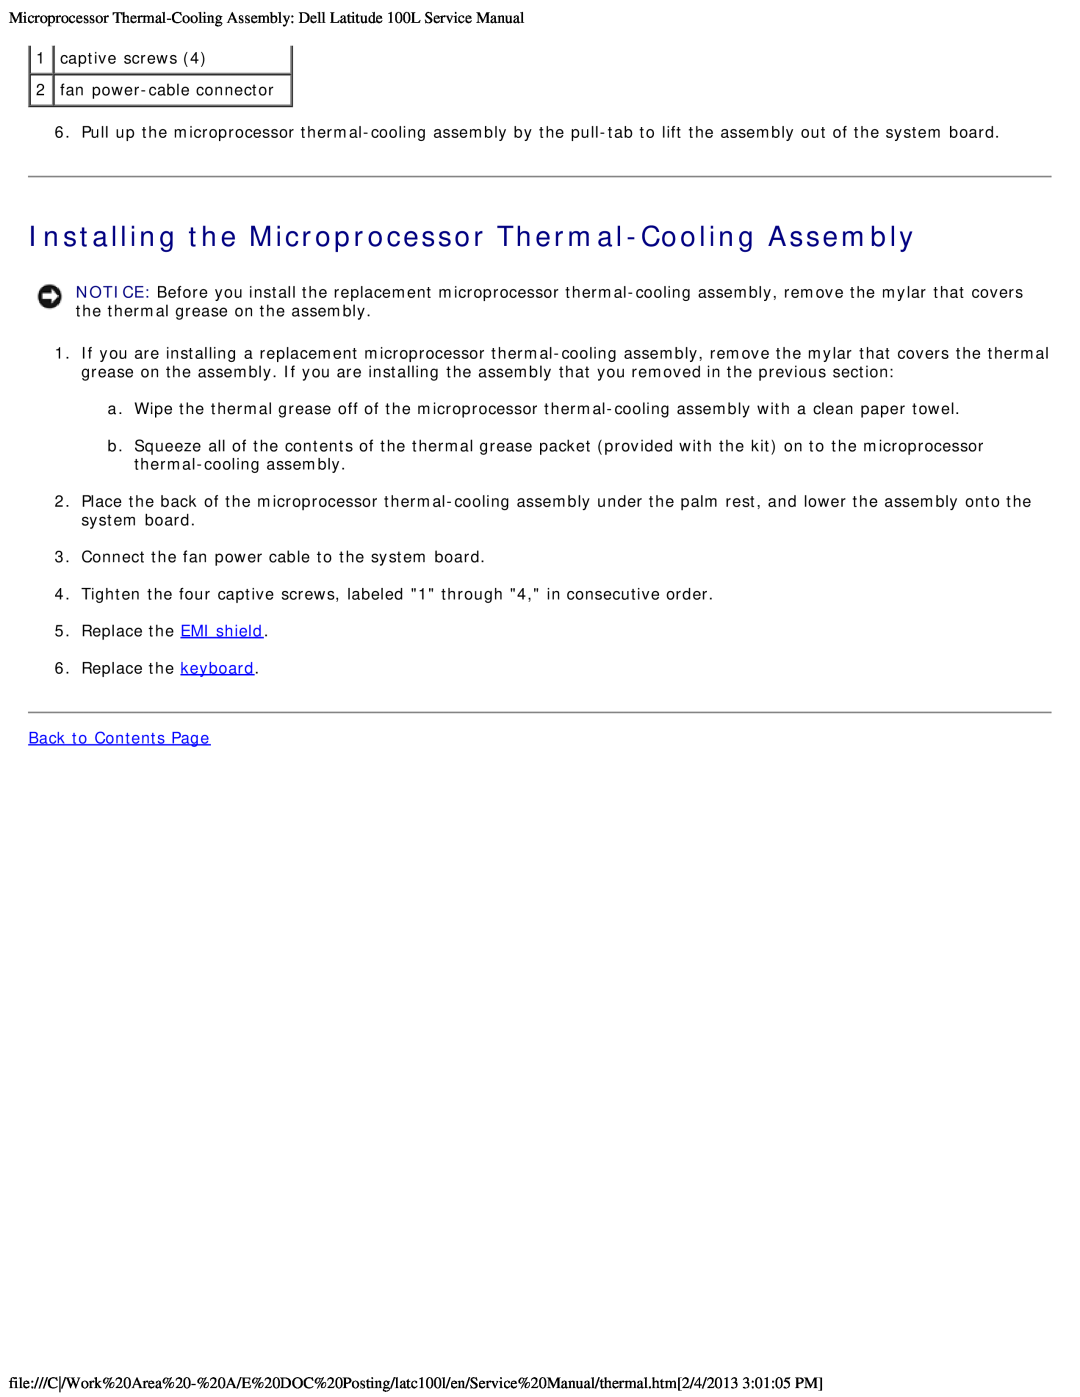 Dell 100L service manual Installing the Microprocessor Thermal-Cooling Assembly, Back to Contents Page 